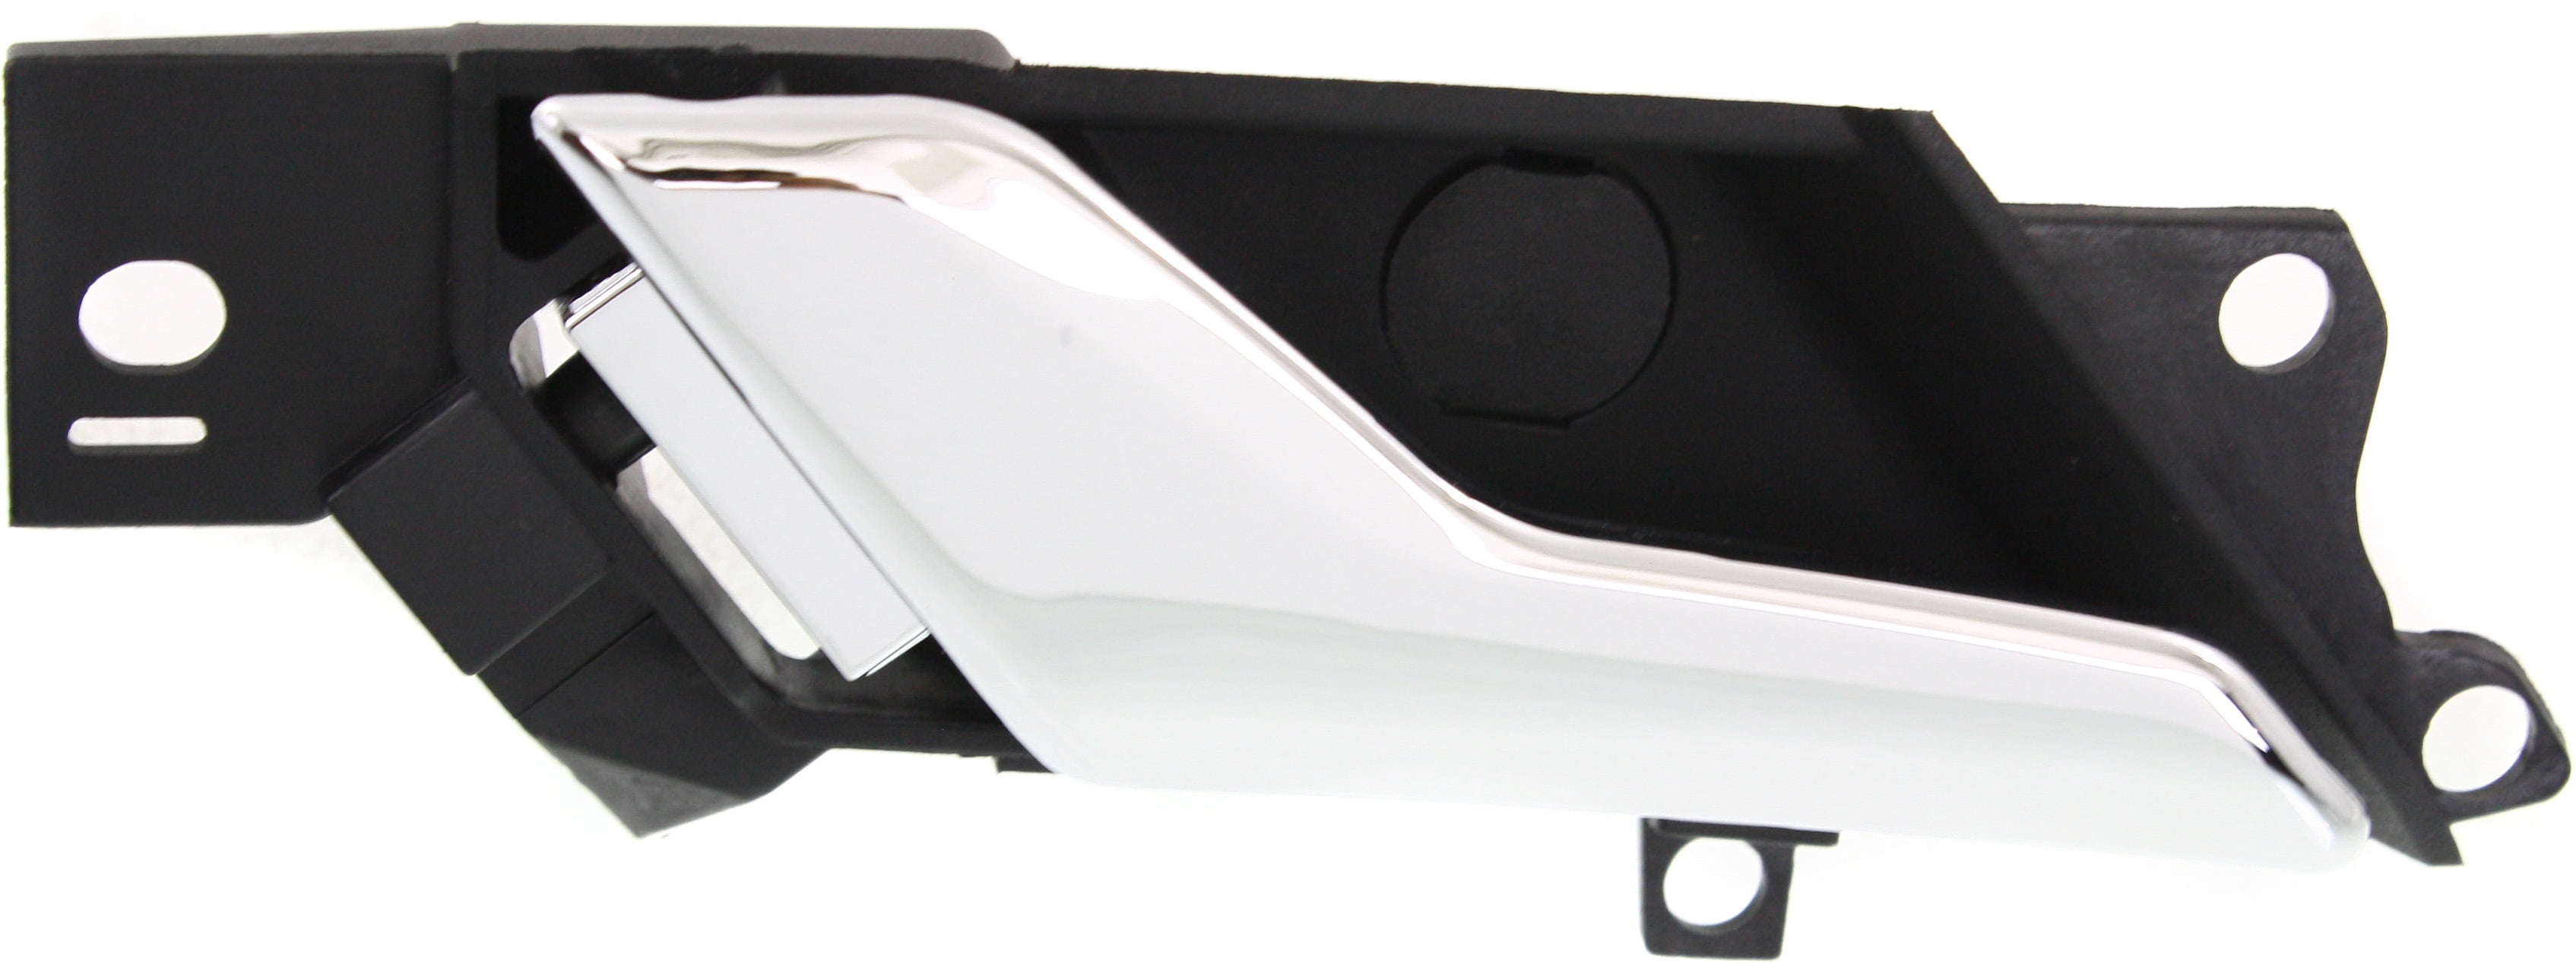 Replacement for 2008-2010 Saturn Vue Replace 96861998 96660863 20983660 20983673 Interior Door Handle Driver-Side Left Front or Rear LH Chrome Replacement for 2012-2015 Chevrolet Captiva Sport 